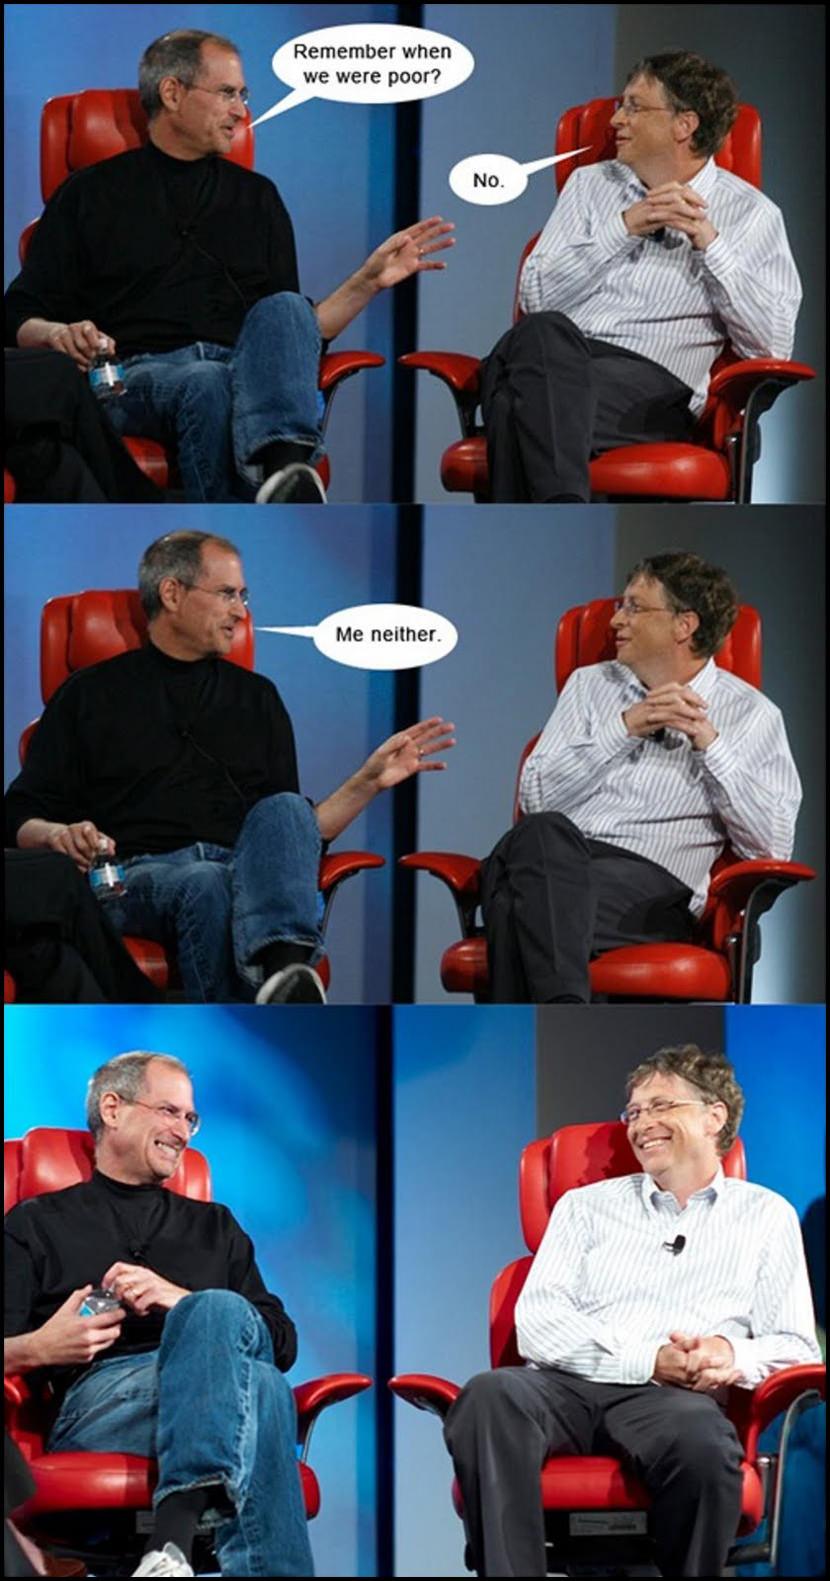 Steve Jobs comes from a middle class family while Bill Gates comes from an upper class family.